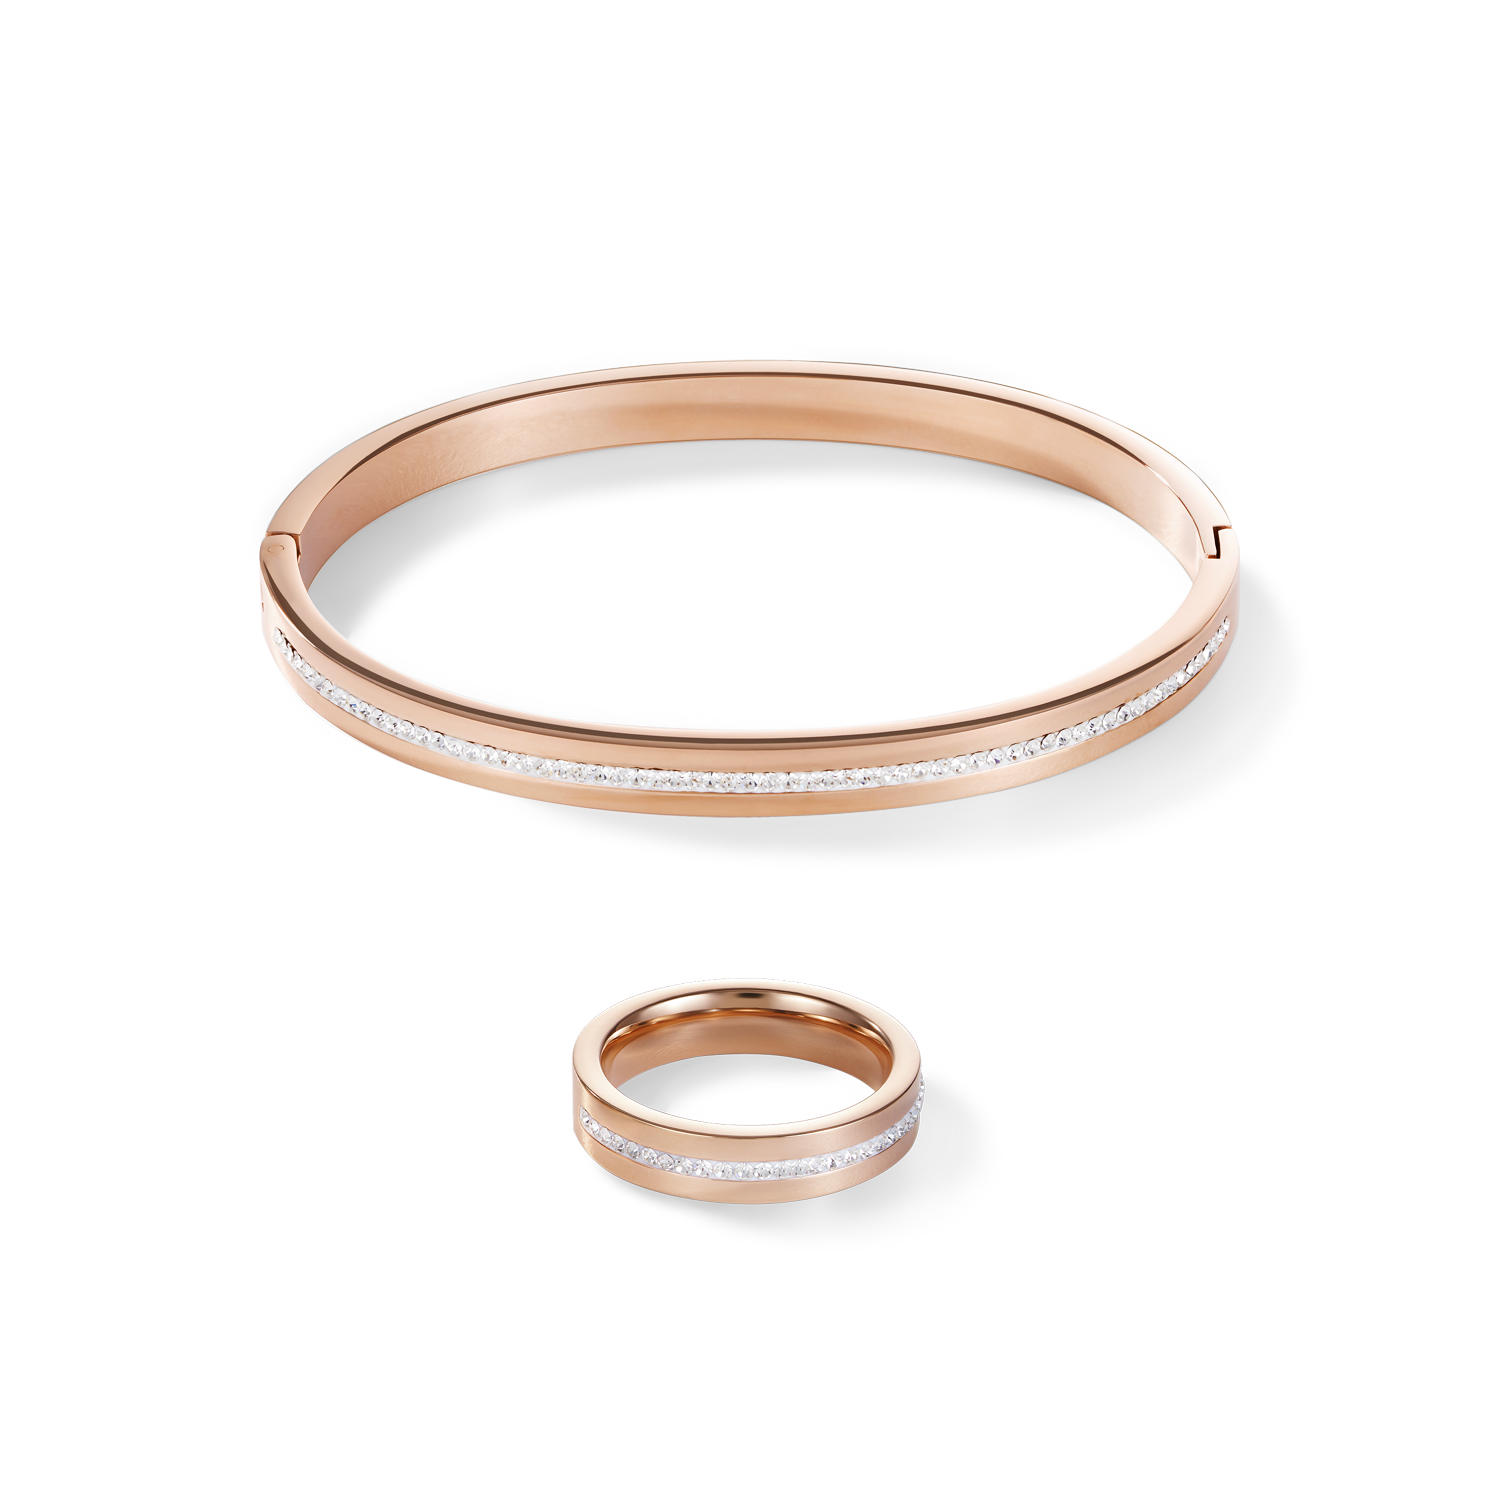 Bangle stainless steel rose gold & crystals pavé strip crystal 17